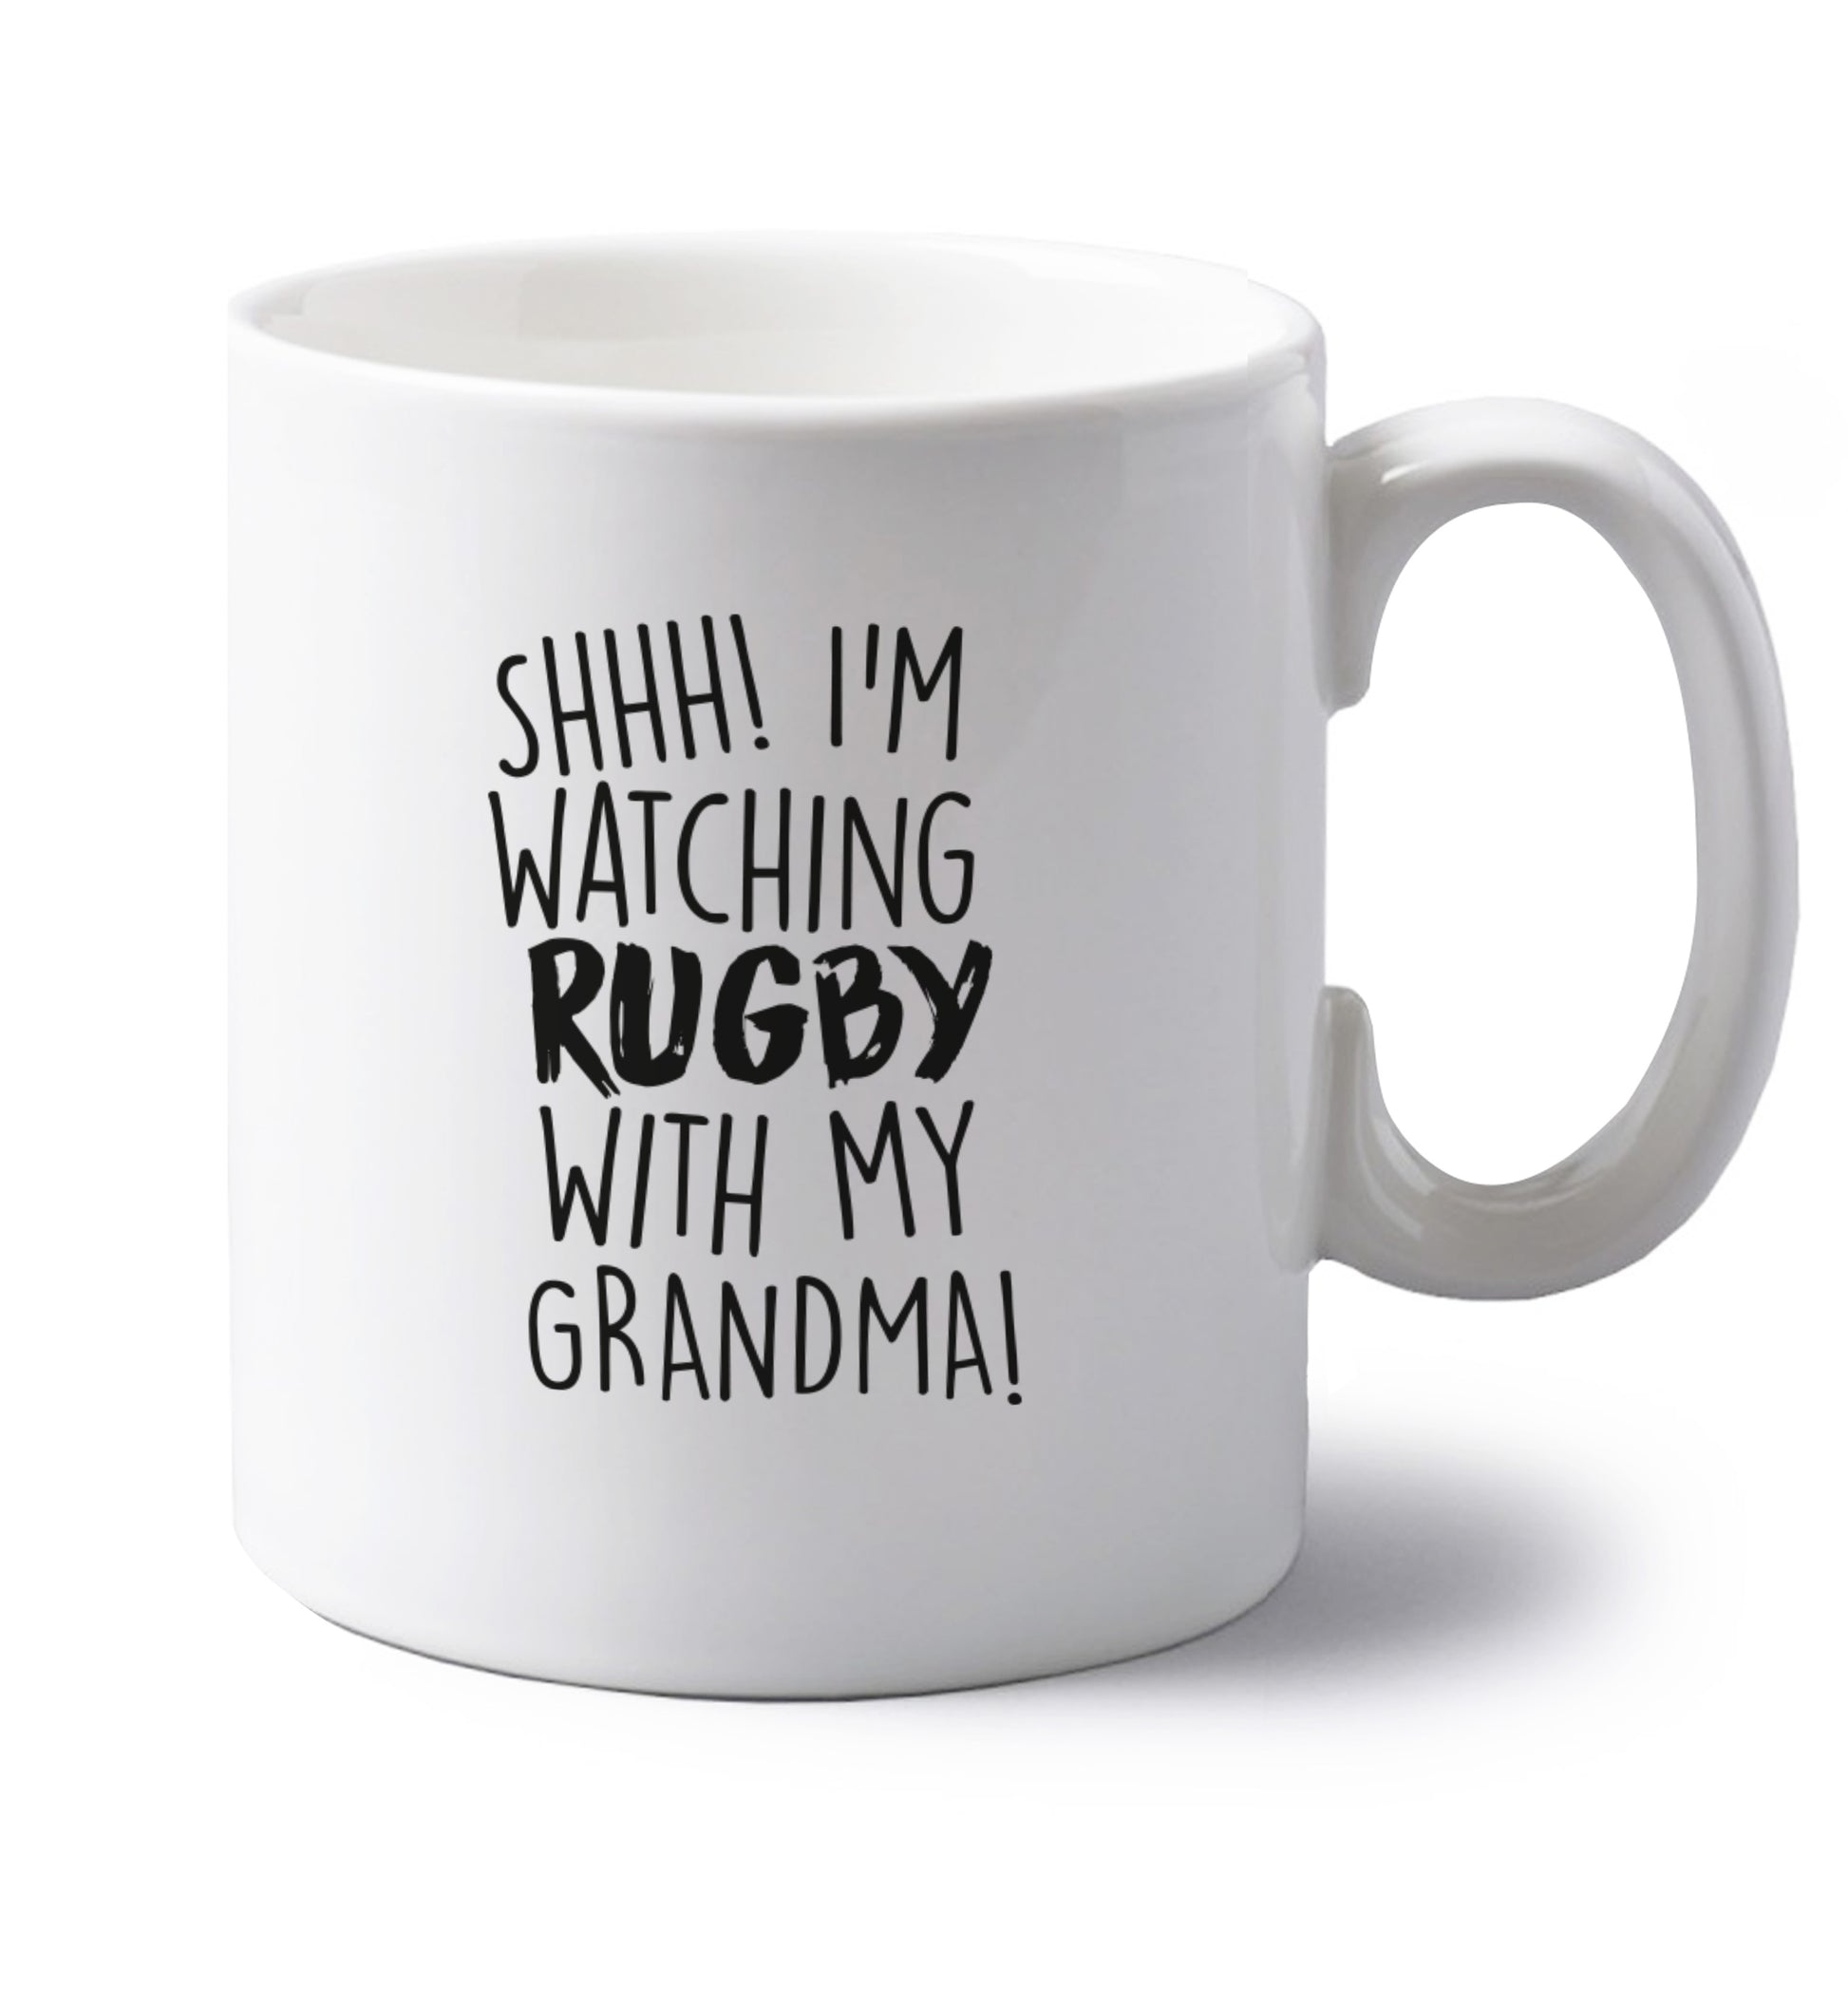 Shh I'm watching rugby with my grandma left handed white ceramic mug 